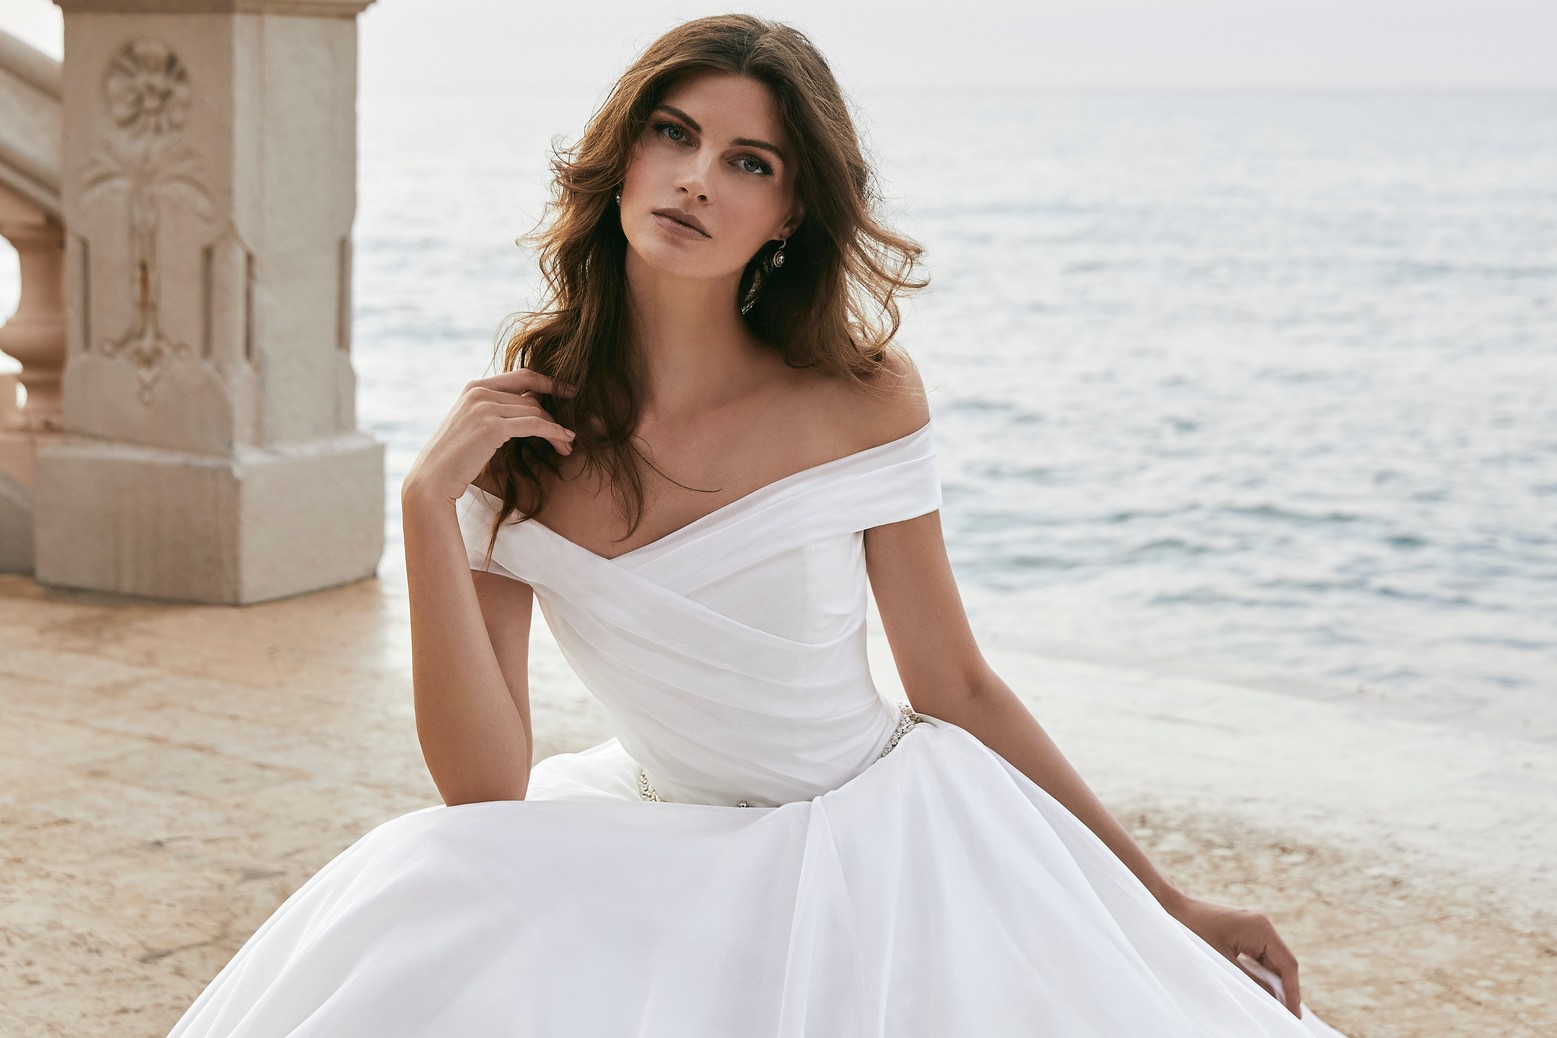 Close up of a brunette model sat on a stone floor by the sea in Victoria Jane 18619, a plain ivory ballgown wedding dress with a bateau off-the-shoulder neckline and a delicate sparkly diamante belt